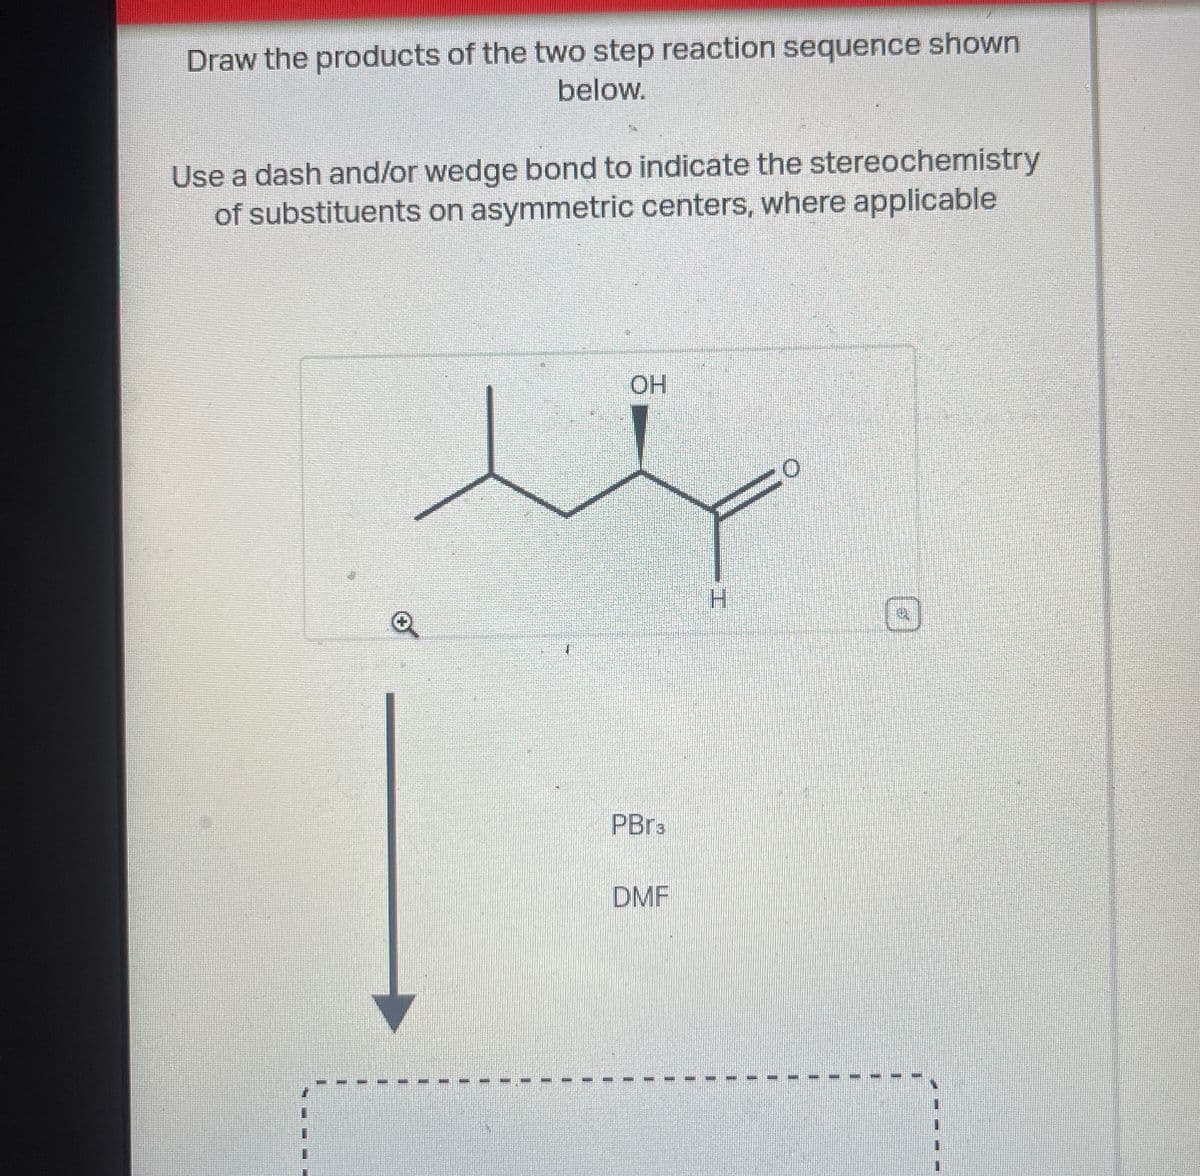 Draw the products of the two step reaction sequence shown
below.
Use a dash and/or wedge bond to indicate the stereochemistry
of substituents on asymmetric centers, where applicable
OH
PBr3
DMF
H
0